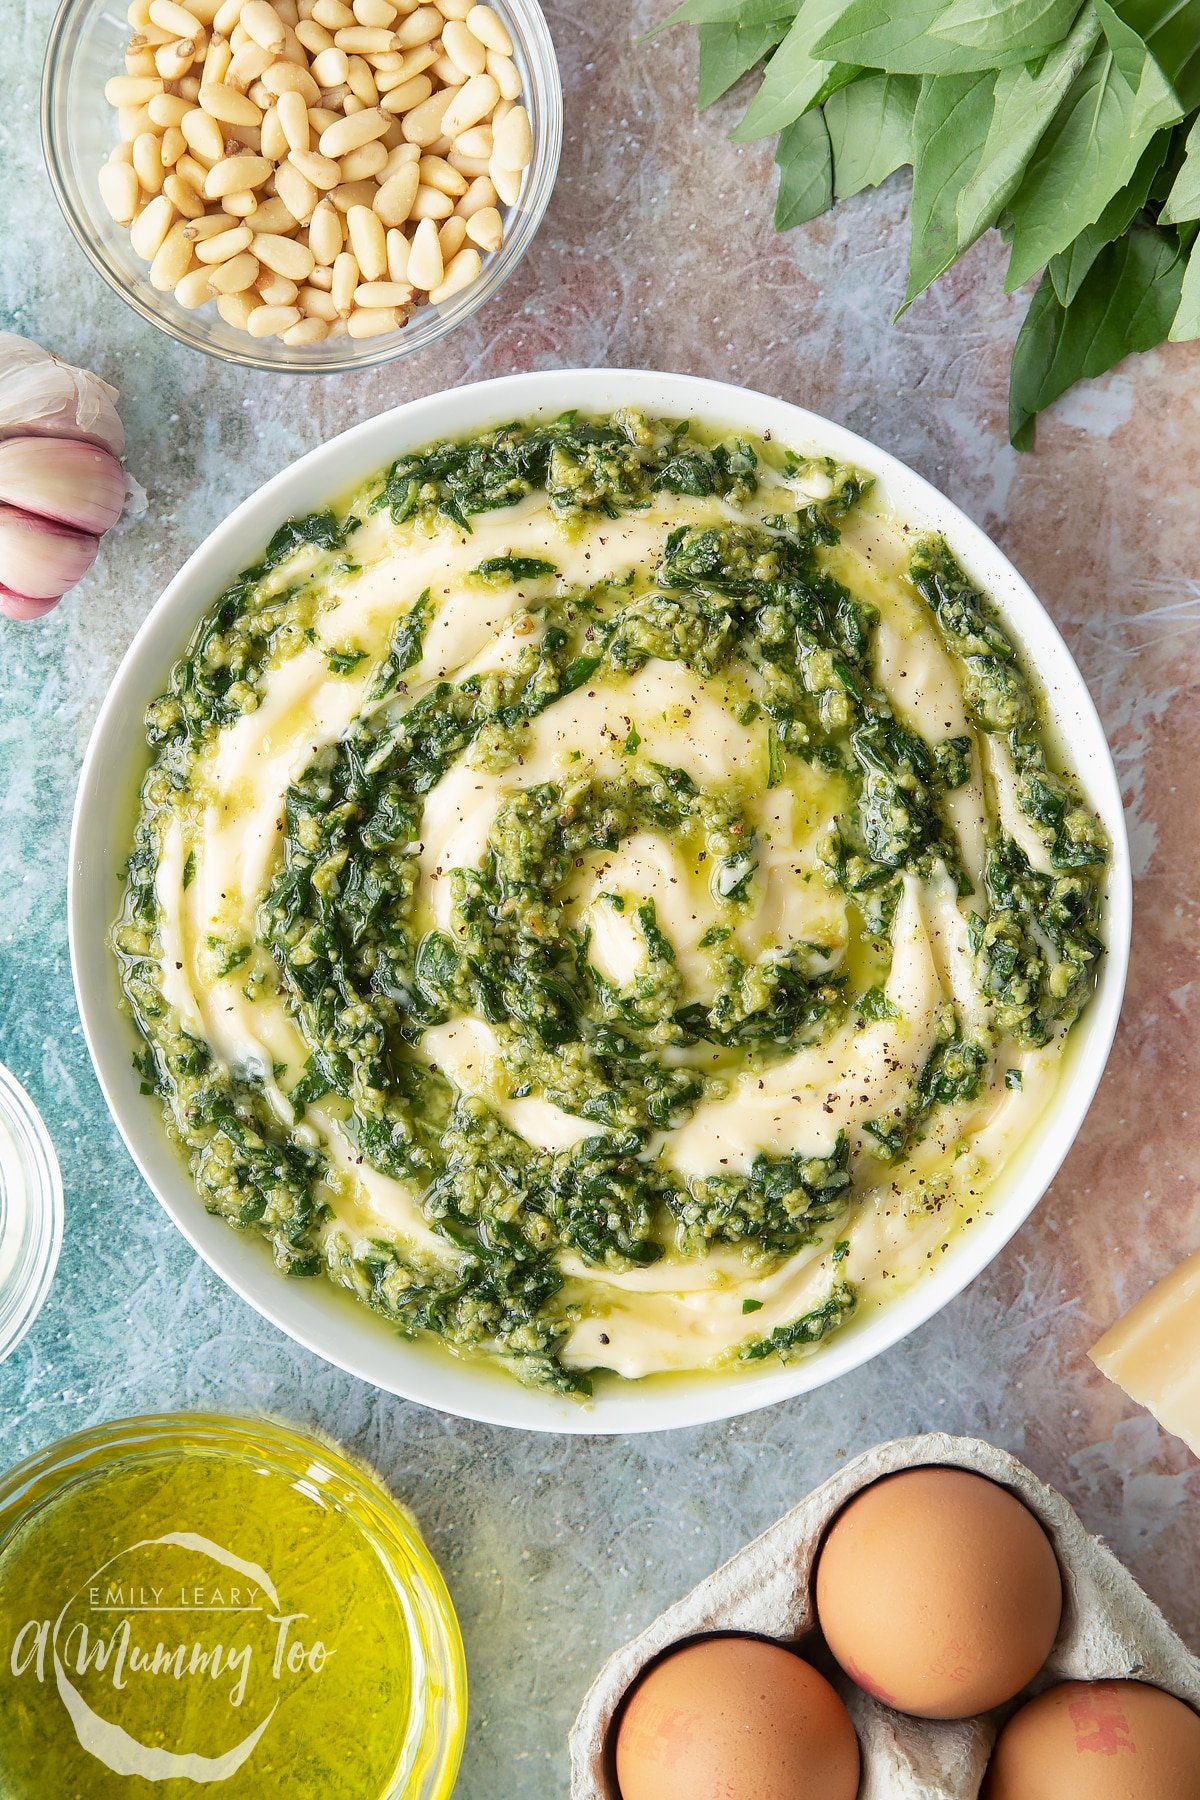 Pesto mayo in a white bowl shown from above. The pesto and mayonnaise are swirled together.